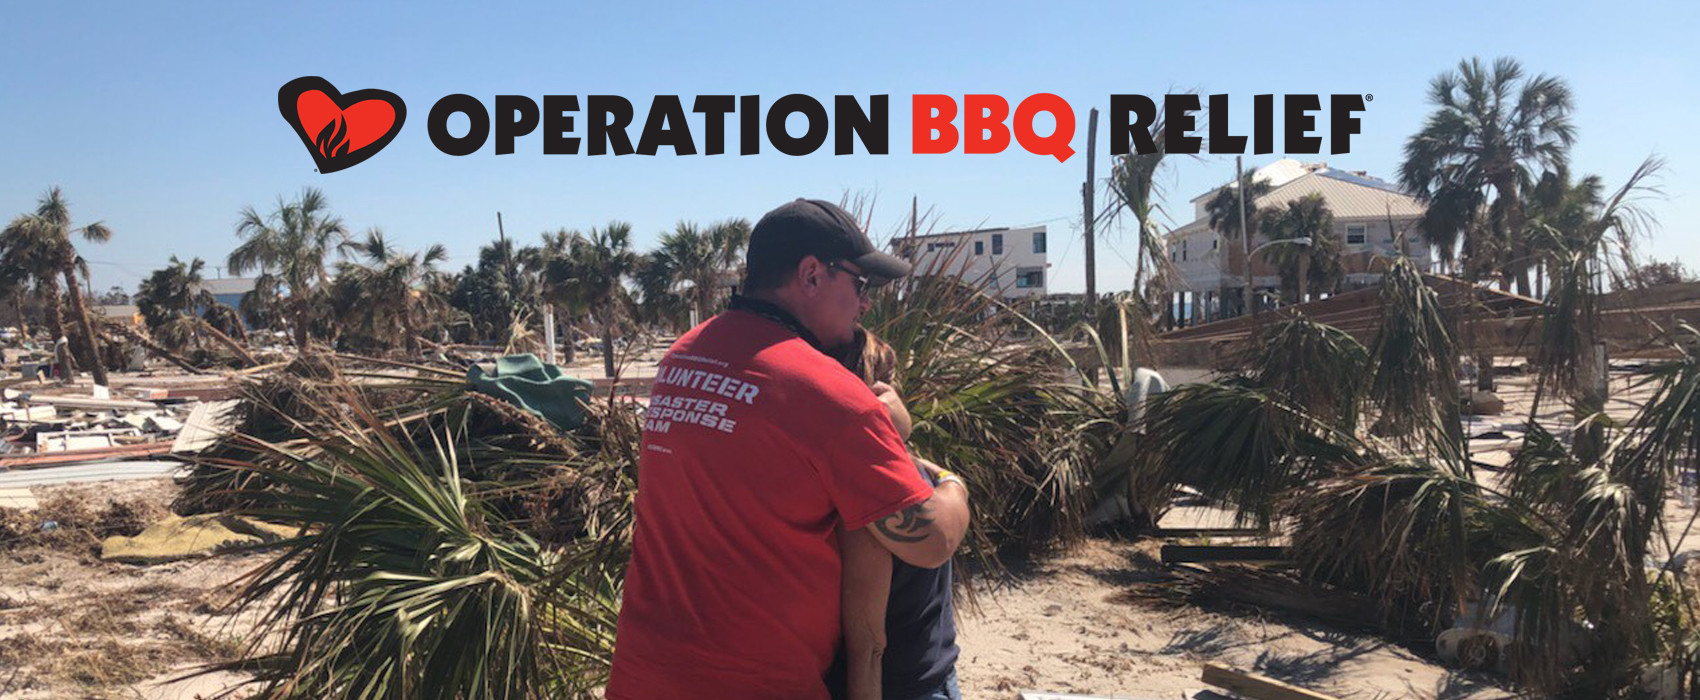 Operation Barbecue BBQ Relief Deilvers Hot Meals to Hurricane Dorian victims in Bahamas reports BPN the propane industry trusted source of news since 1939 propane used to BBQ 10 2019